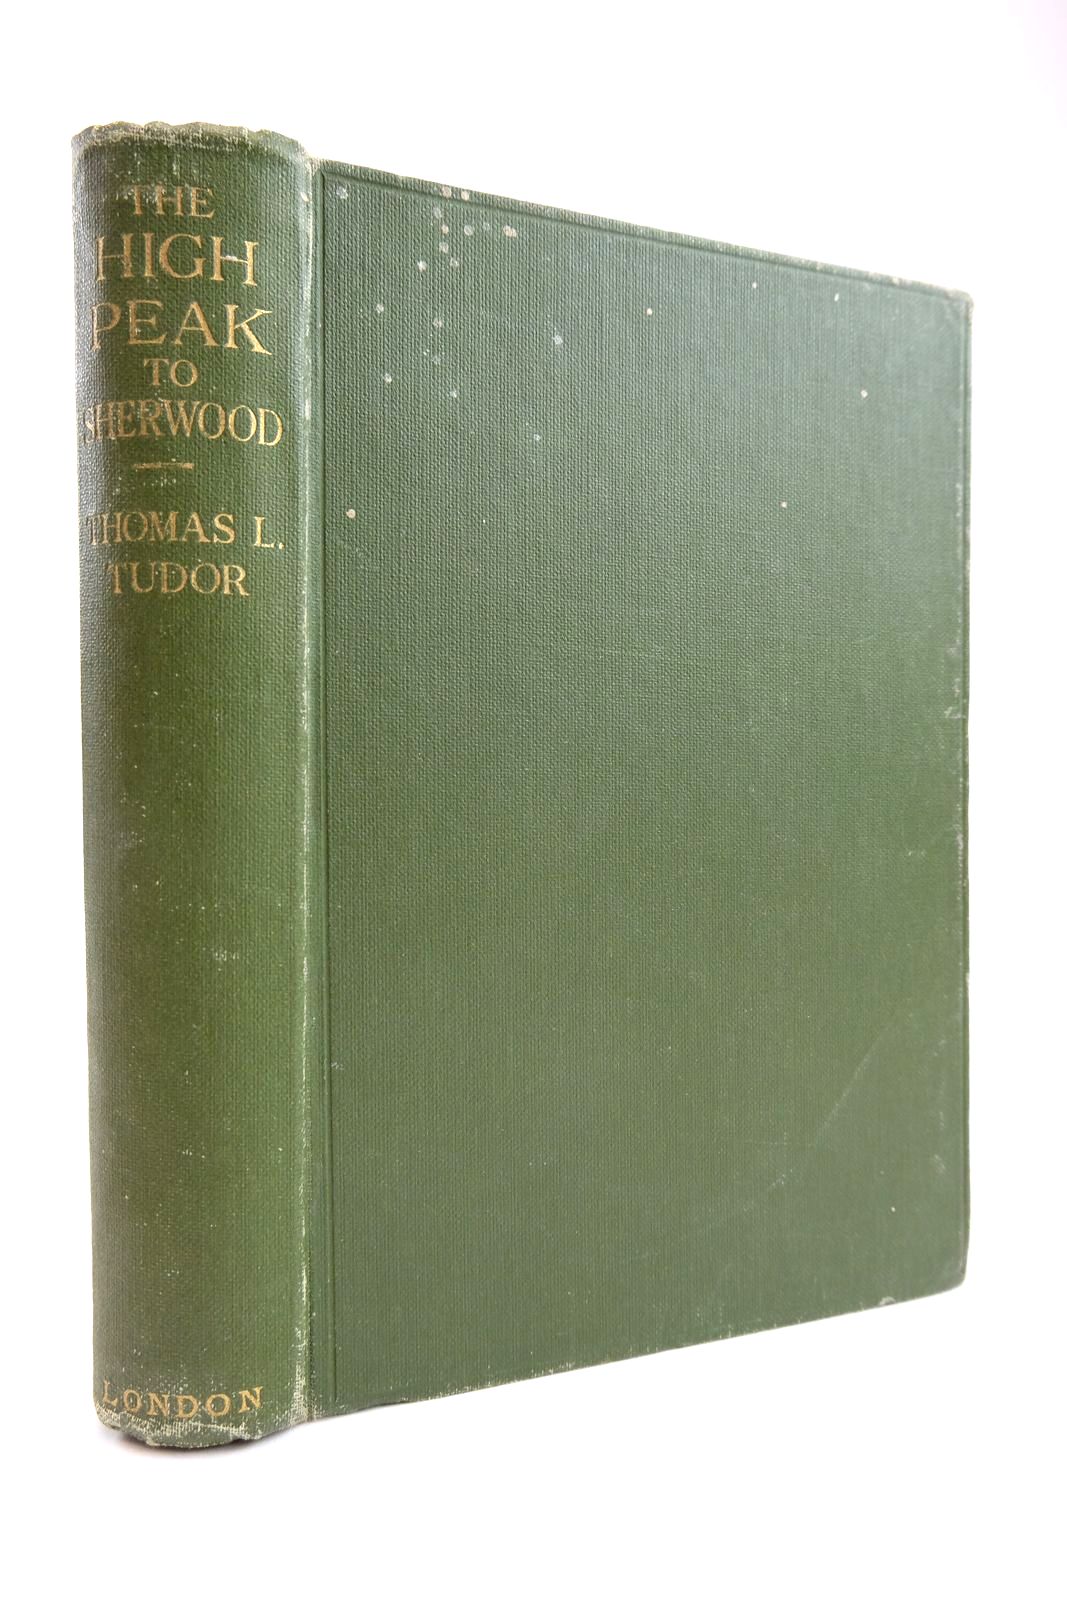 Photo of THE HIGH PEAK TO SHERWOOD written by Tudor, Thomas L. illustrated by Adcock, Frederick published by Robert Scott (STOCK CODE: 2133683)  for sale by Stella & Rose's Books